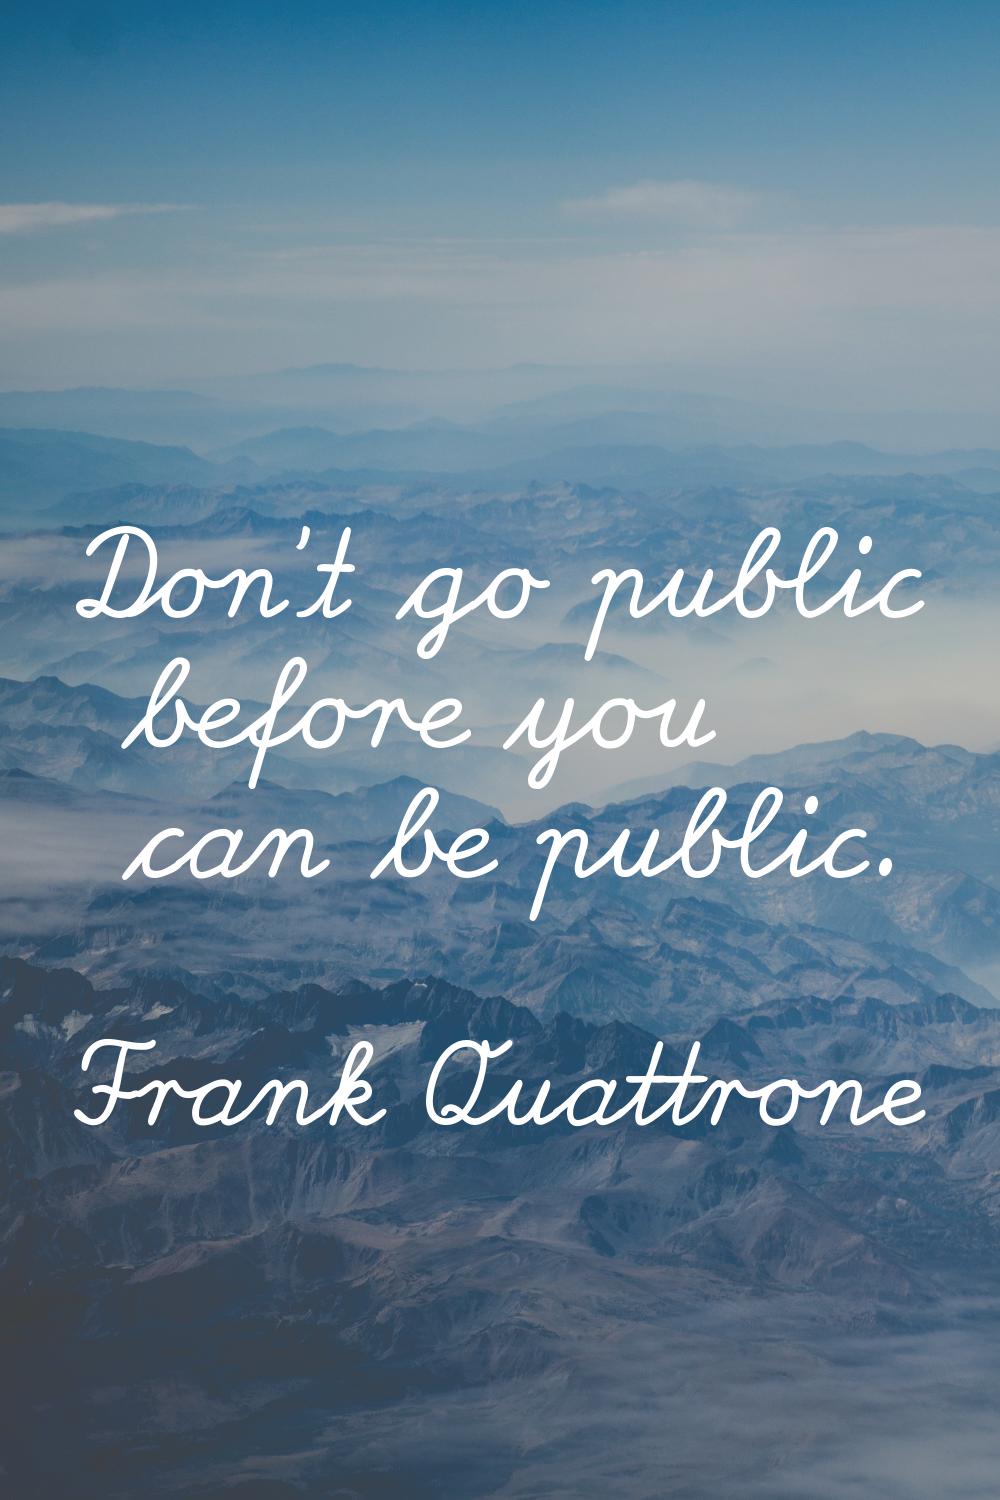 Don't go public before you can be public.